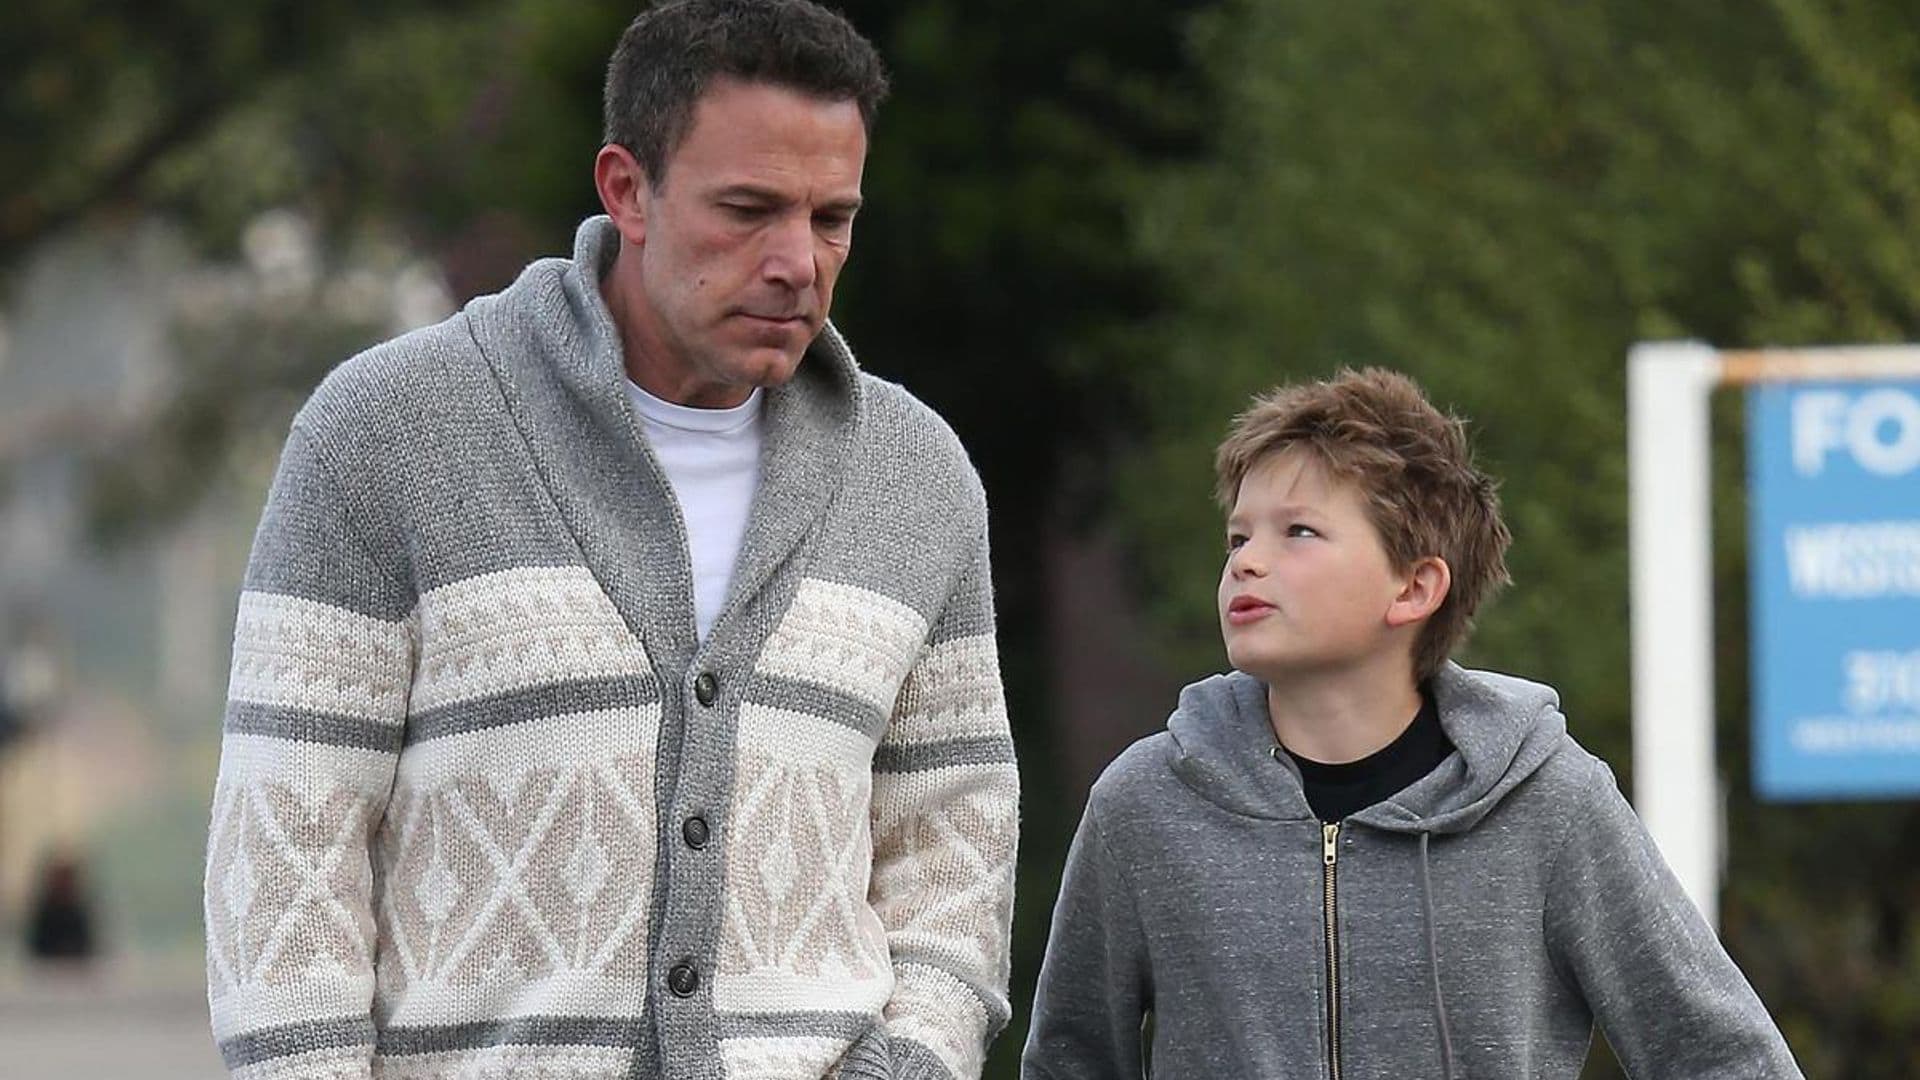 Ben Affleck’s latest father-son moment with Samuel Affleck in Los Angeles